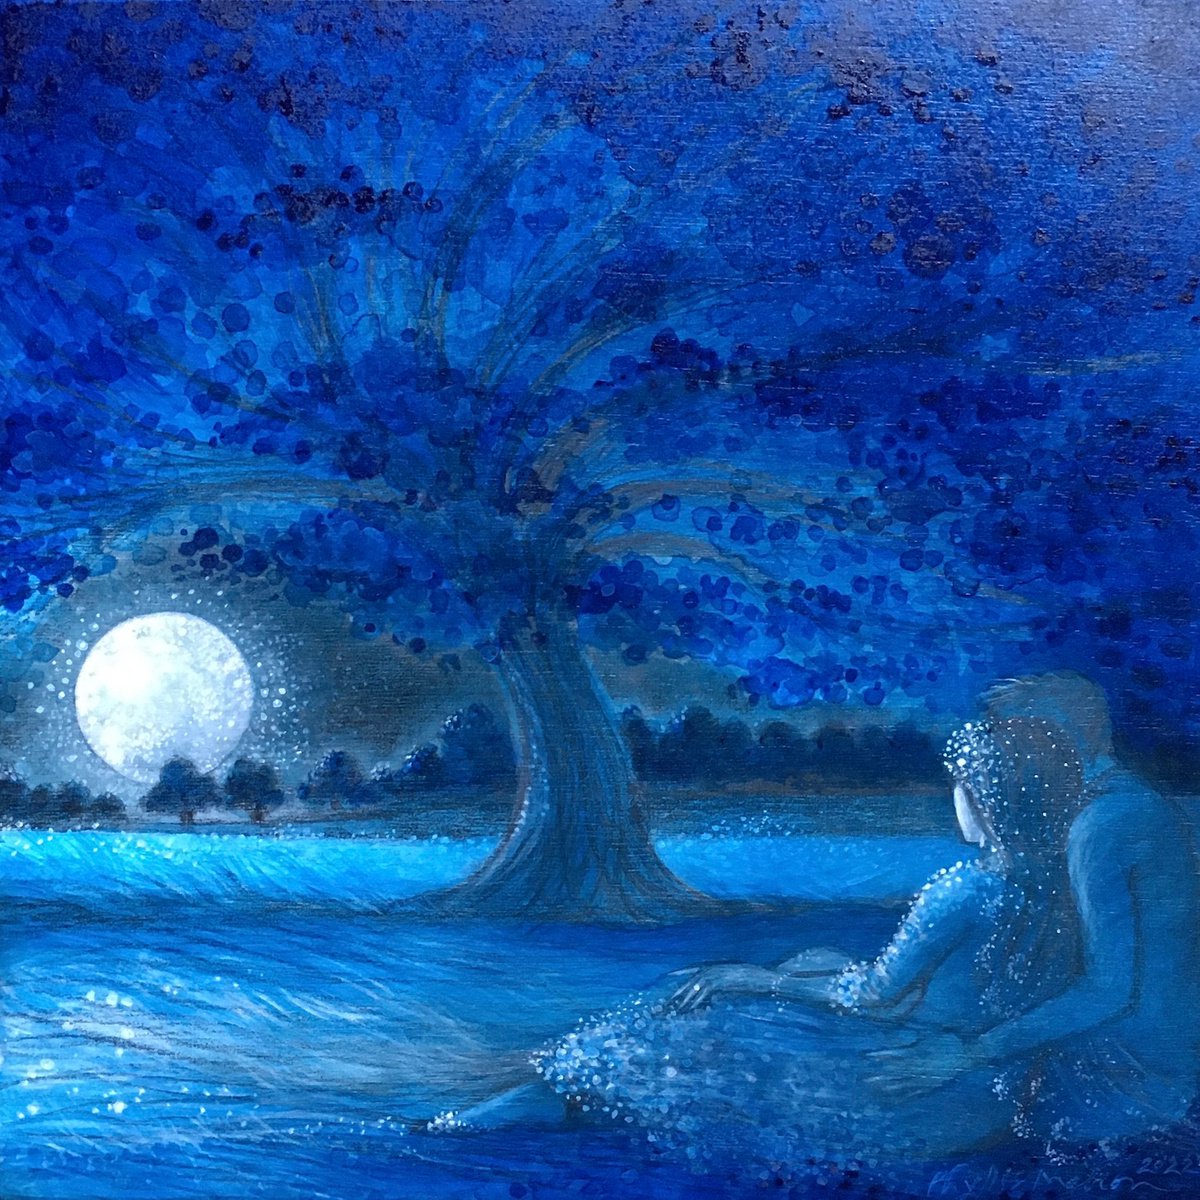 Lovers Gazing at a Diaphanous Moon by Phyllis Mahon